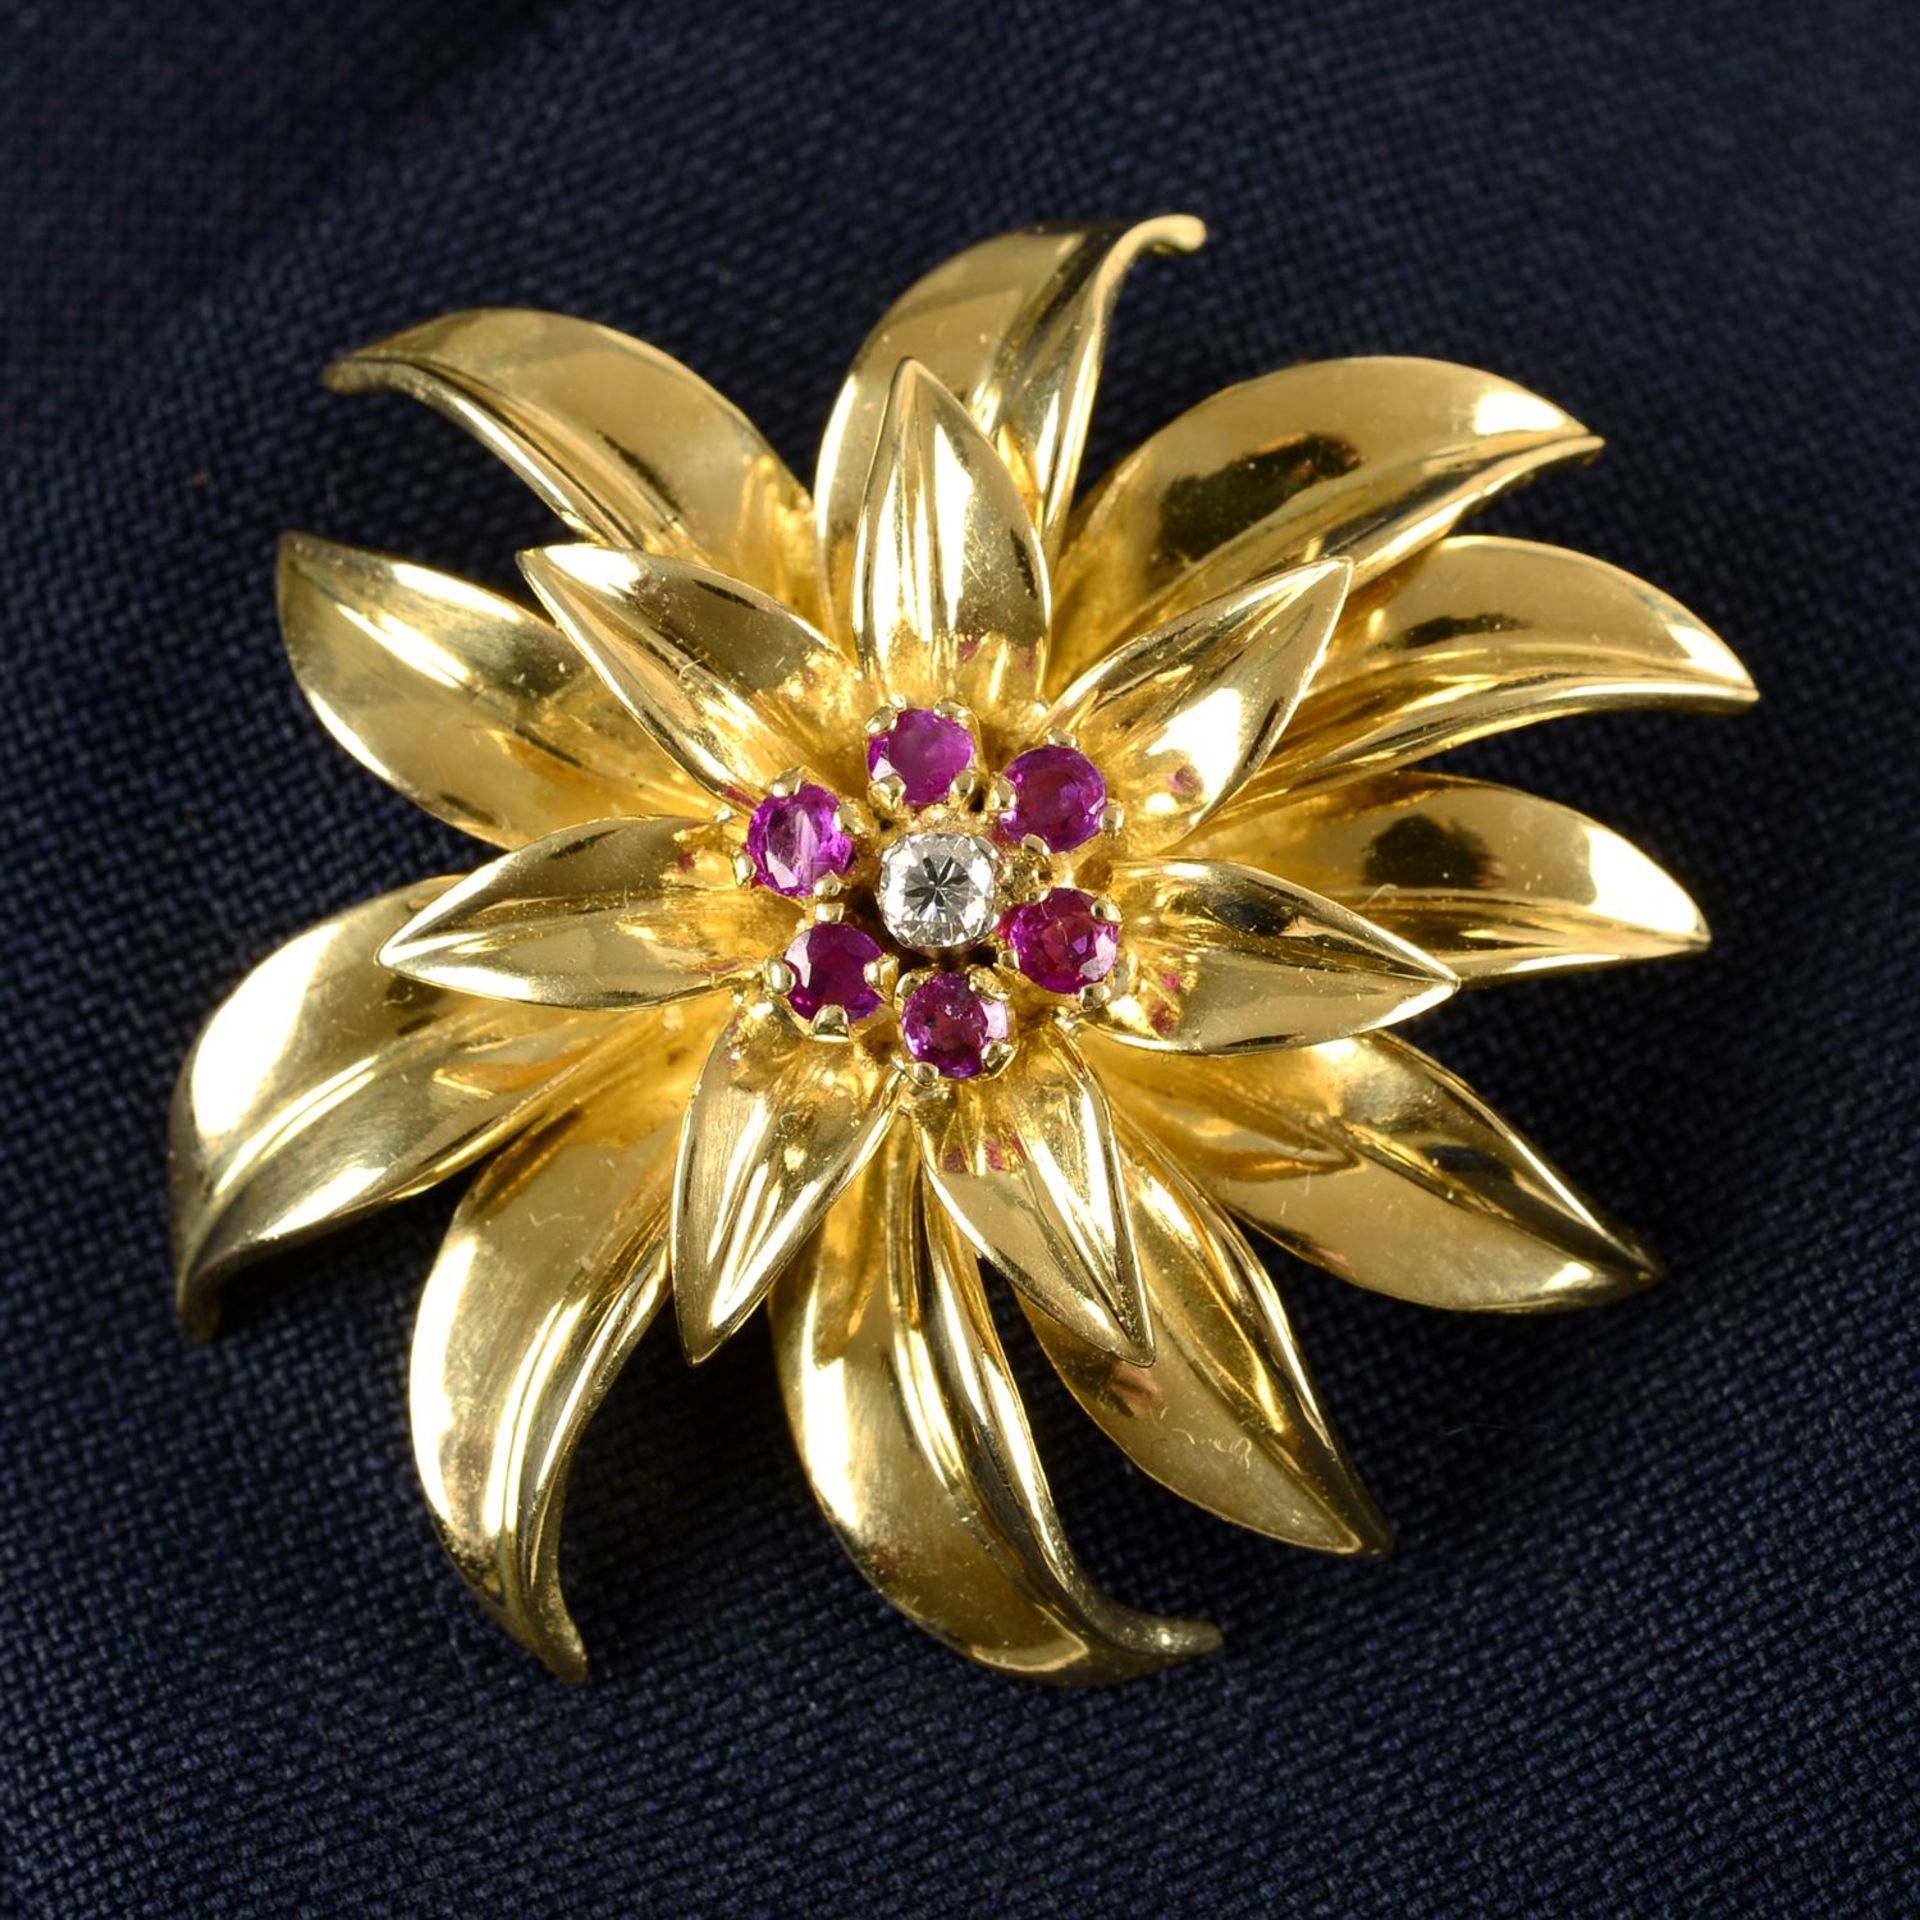 A mid 20th century 18ct gold diamond and ruby floral brooch/pendant, by Tiffany & Co.